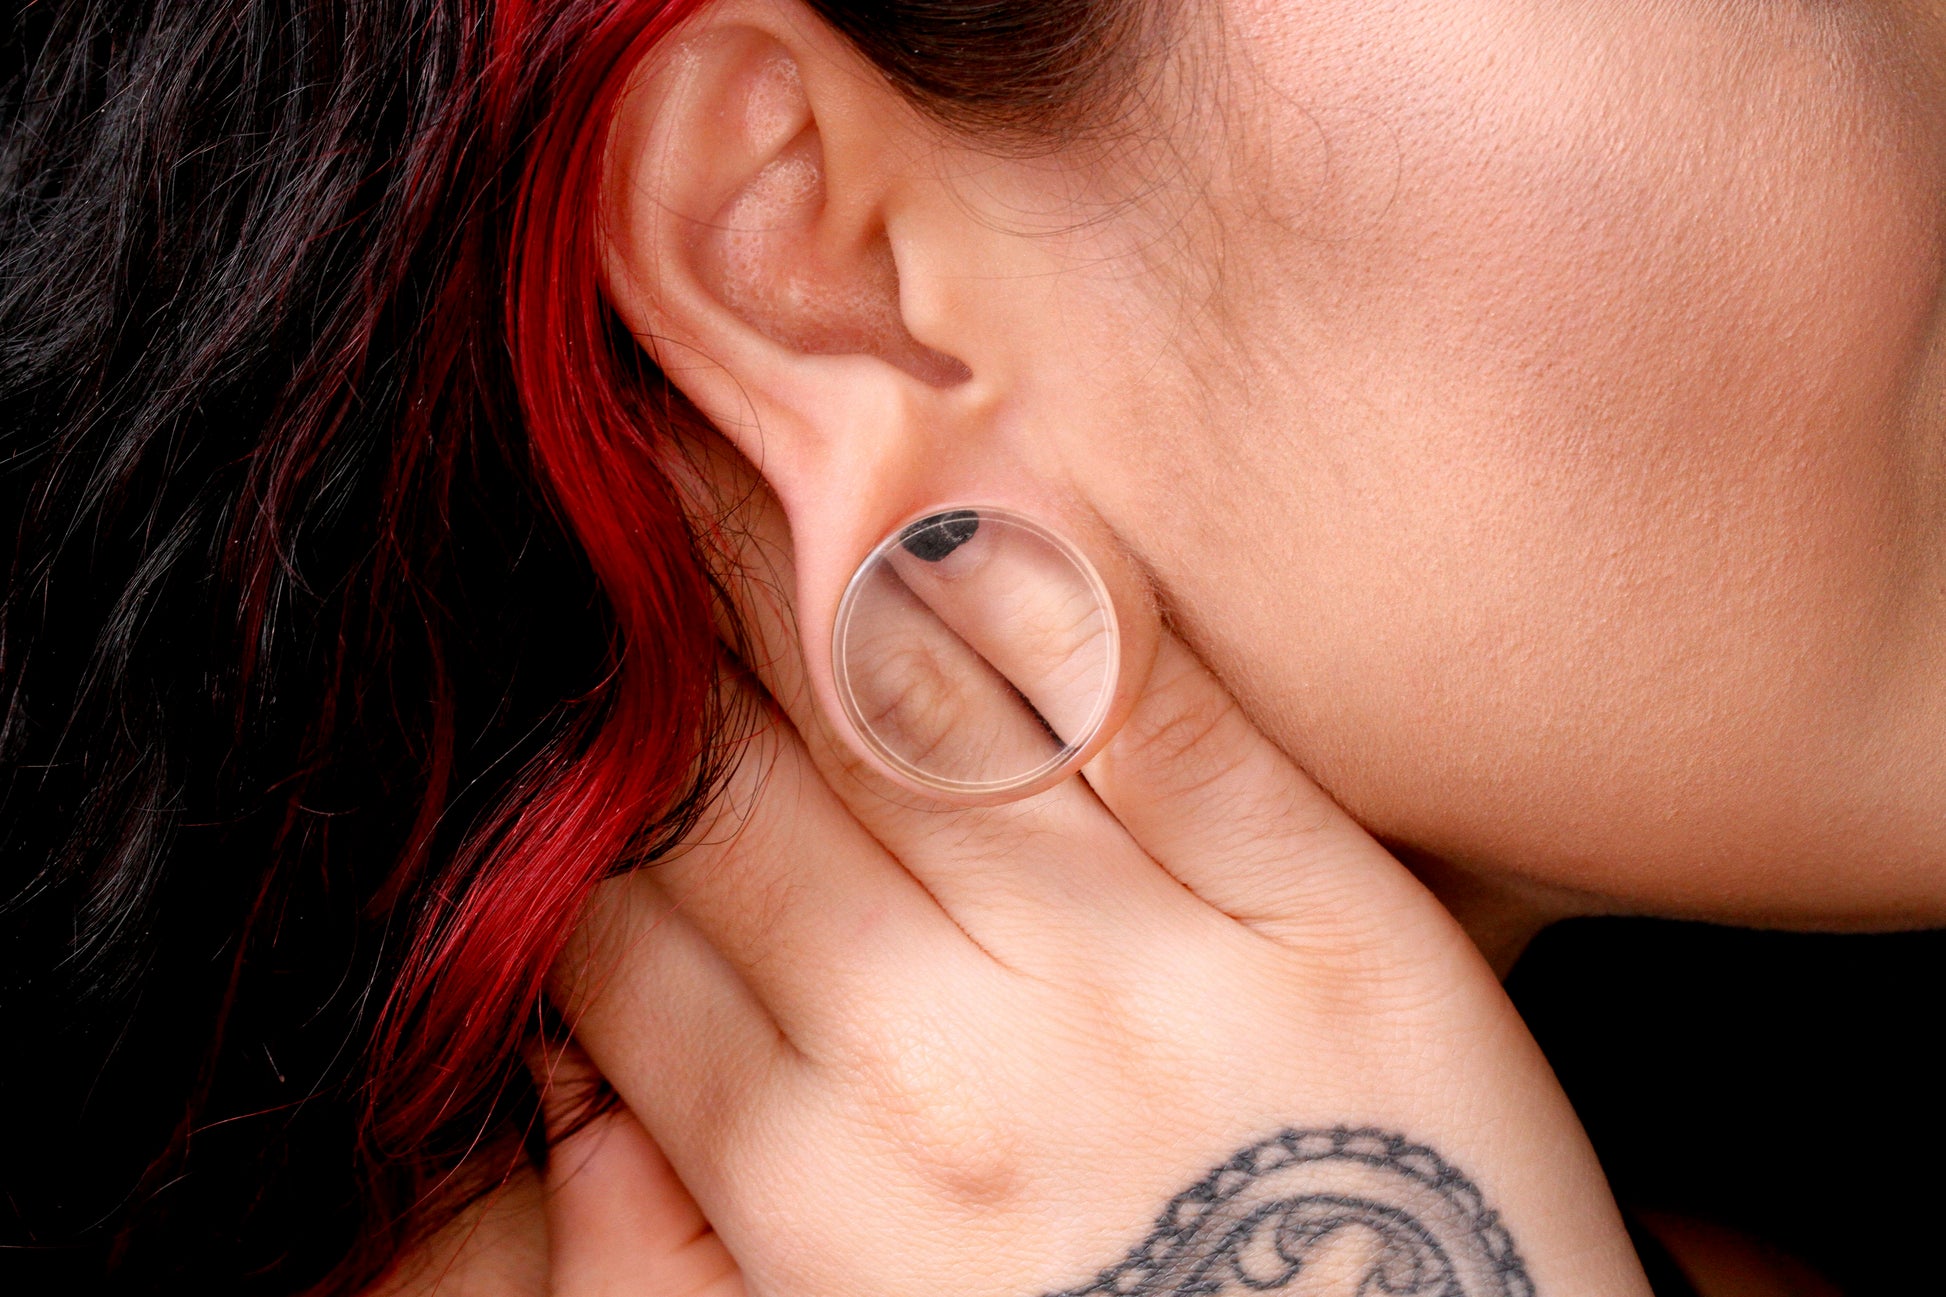 Clear glass gauged plugs